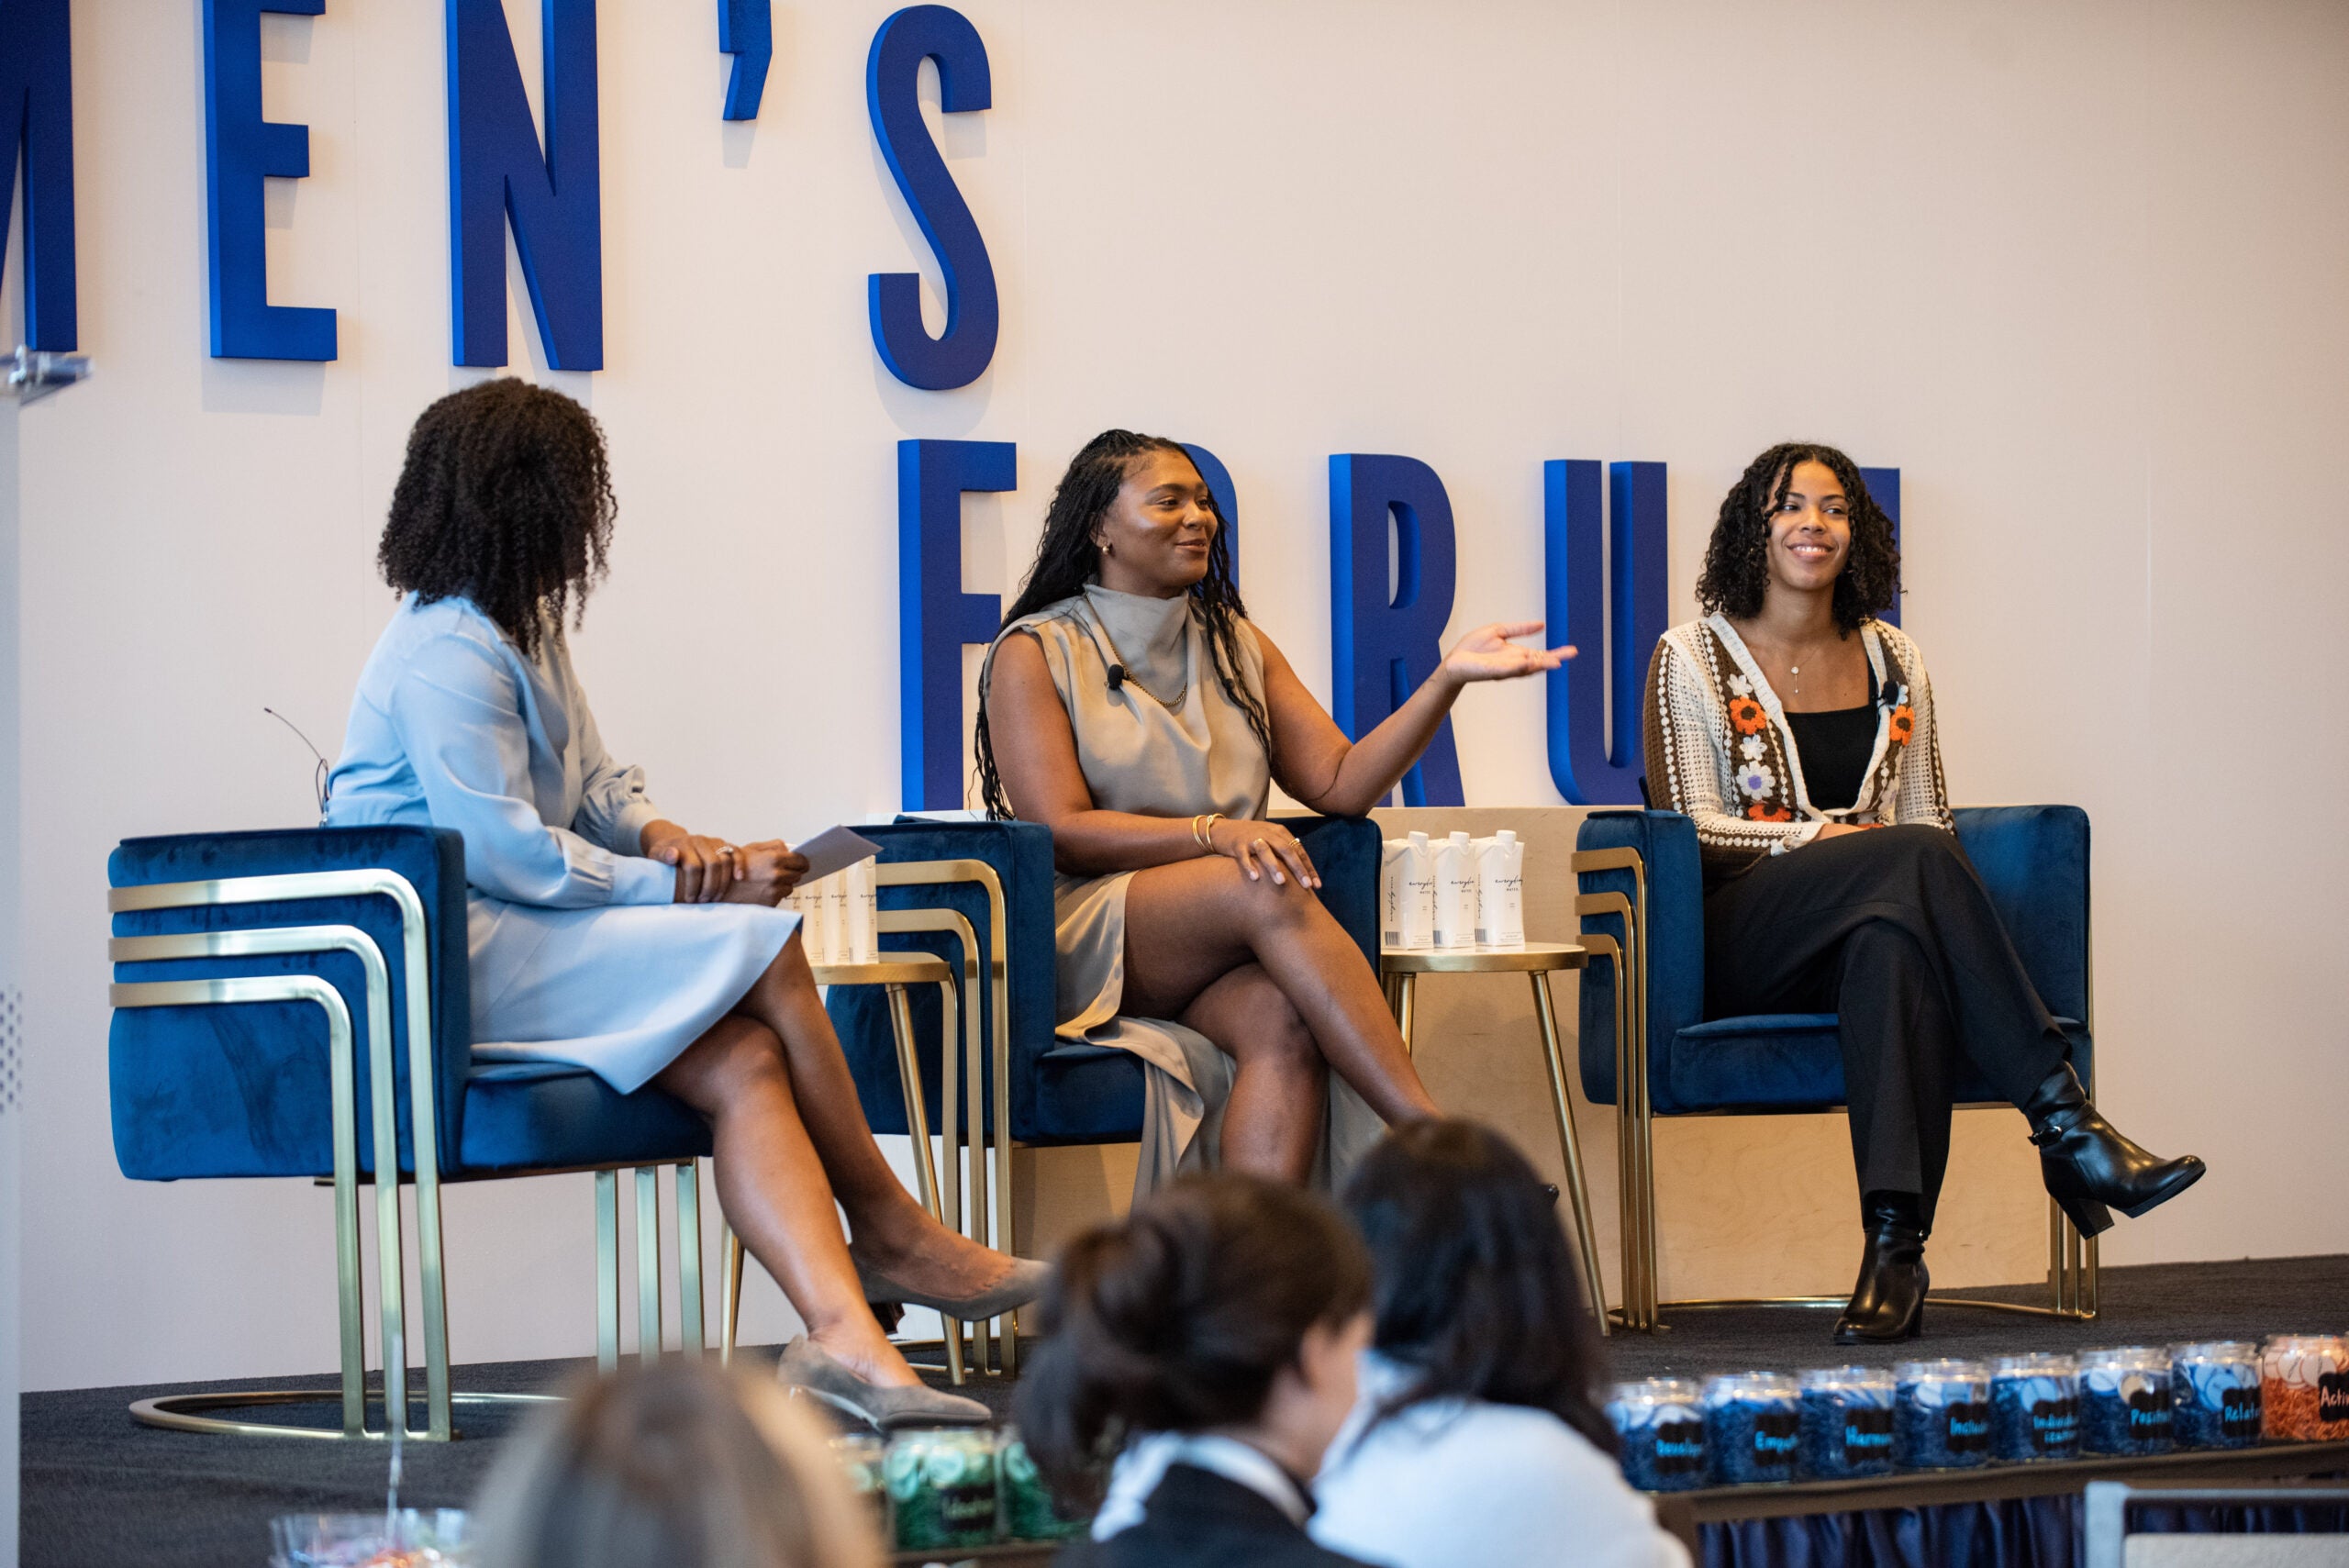 three women sit in blue armchairs on a stage in front of the words "women's forum"